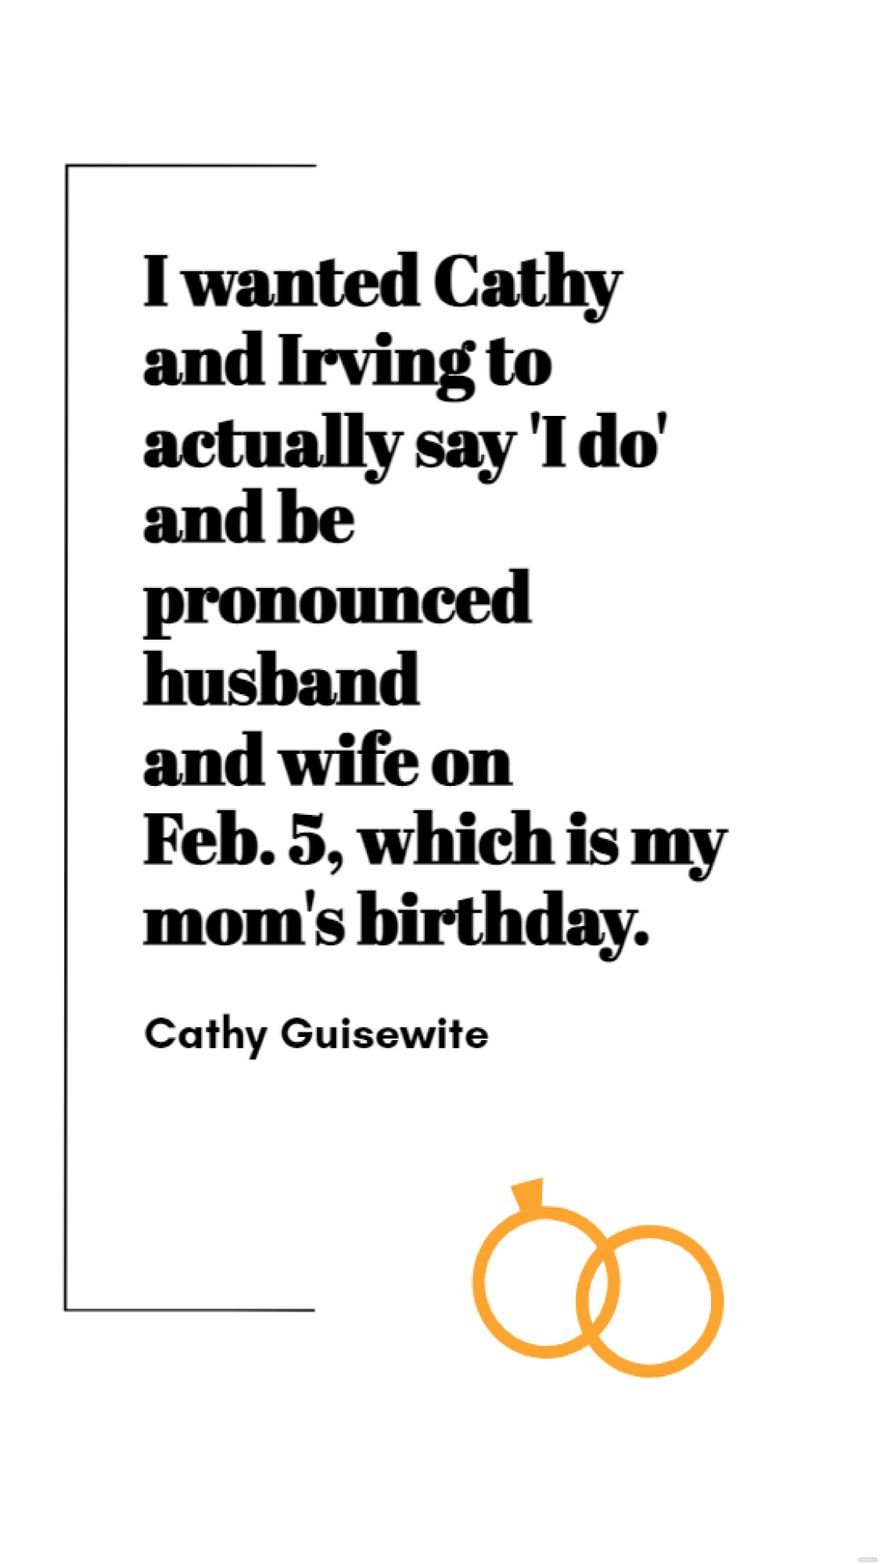 Free Cathy Guisewite - I wanted Cathy and Irving to actually say 'I do' and be pronounced husband and wife on Feb. 5, which is my mom's birthday.